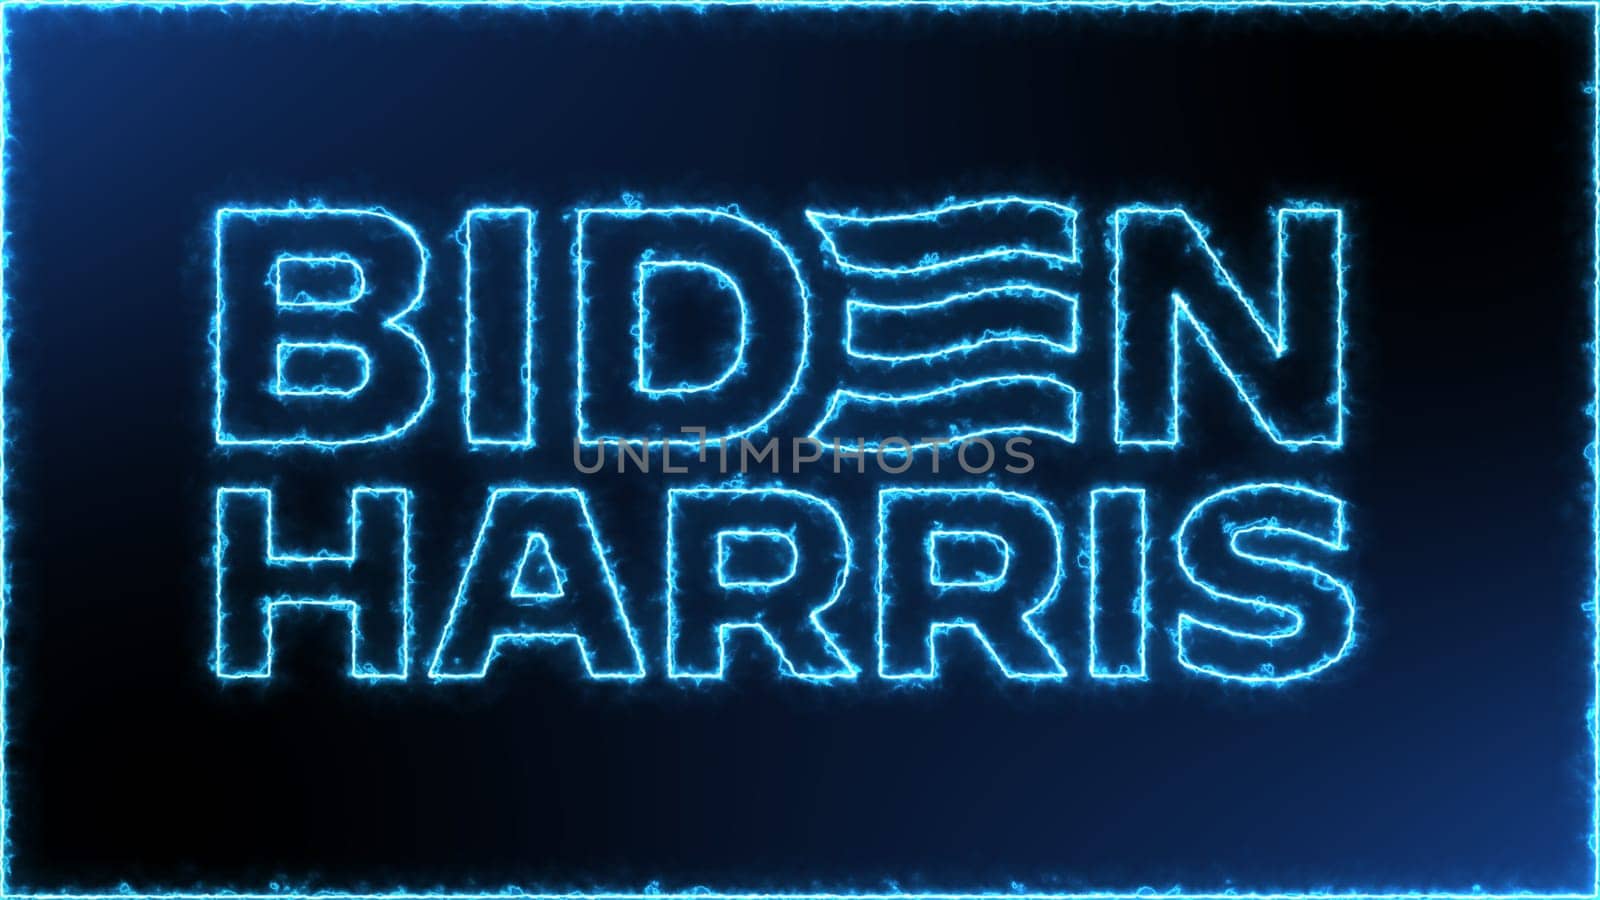 Electrify blue animation of Biden election in 2024, San Diego, California, USA, January 2nd, 2024